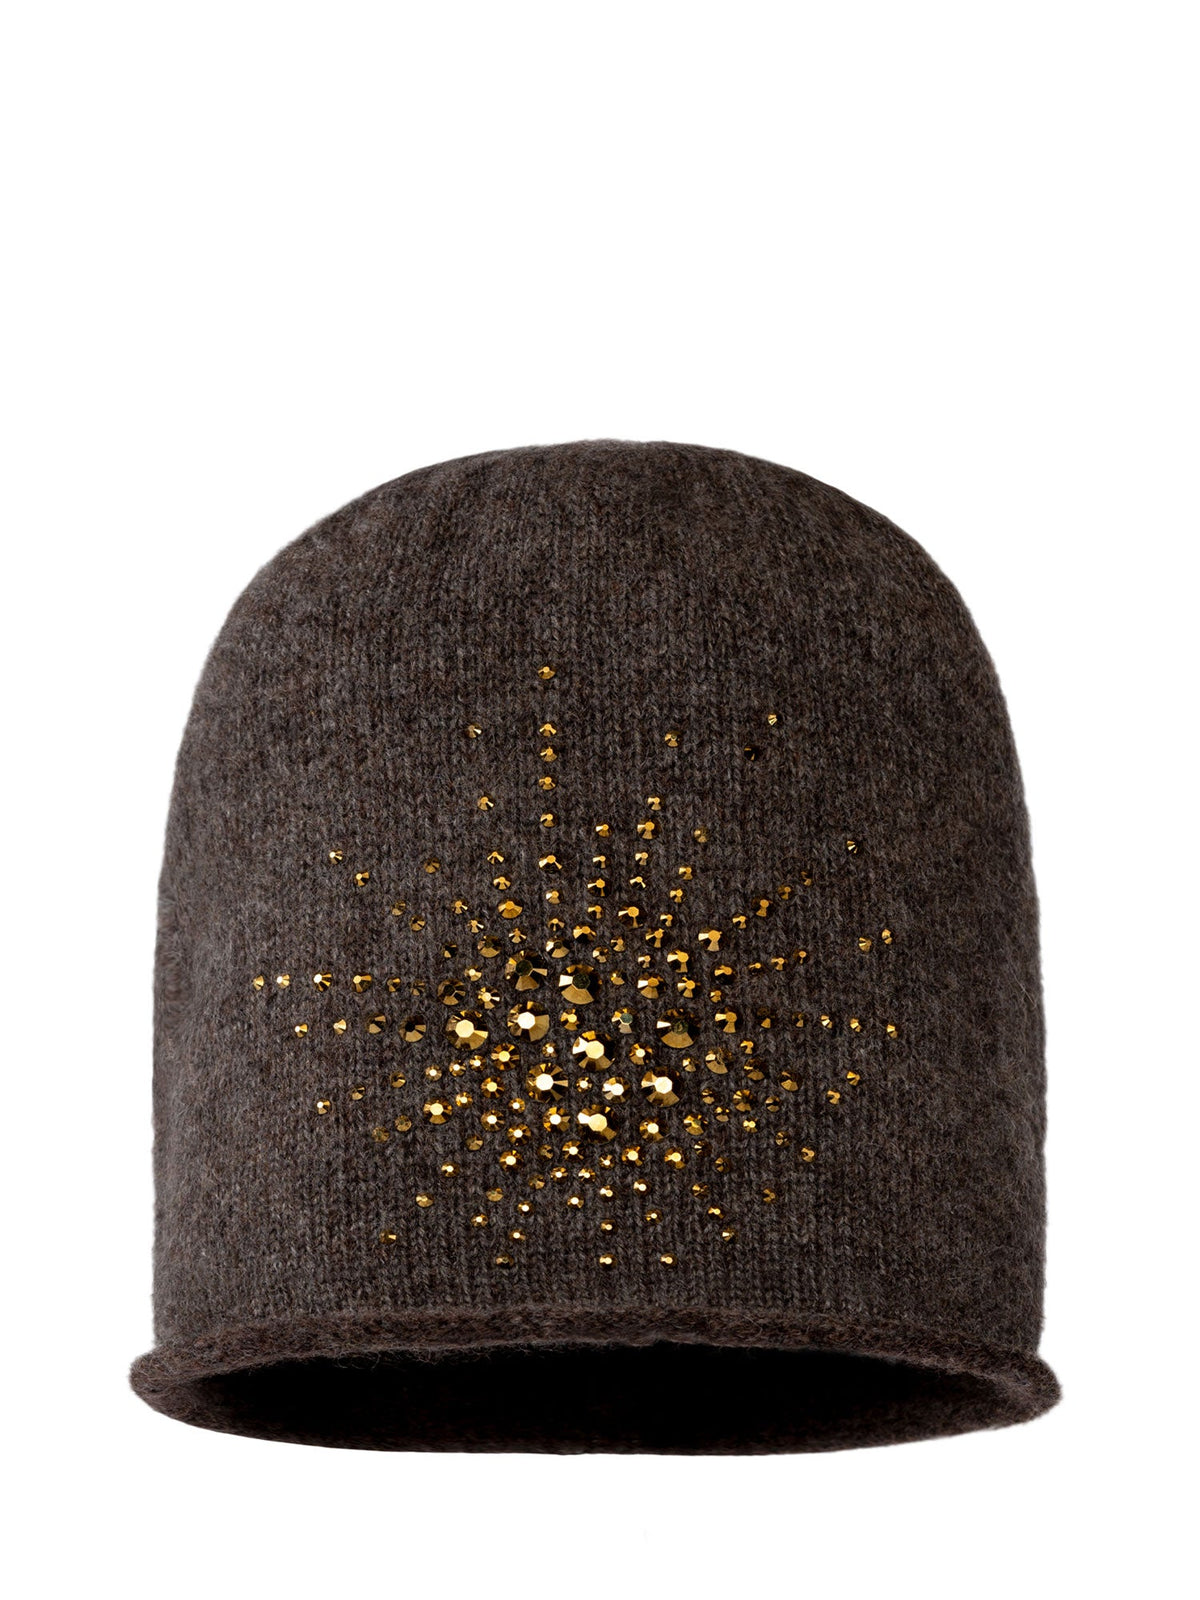 Winter style Metallic Brown Sea Urchin Cloche with a large starburst of large crystals on the front.